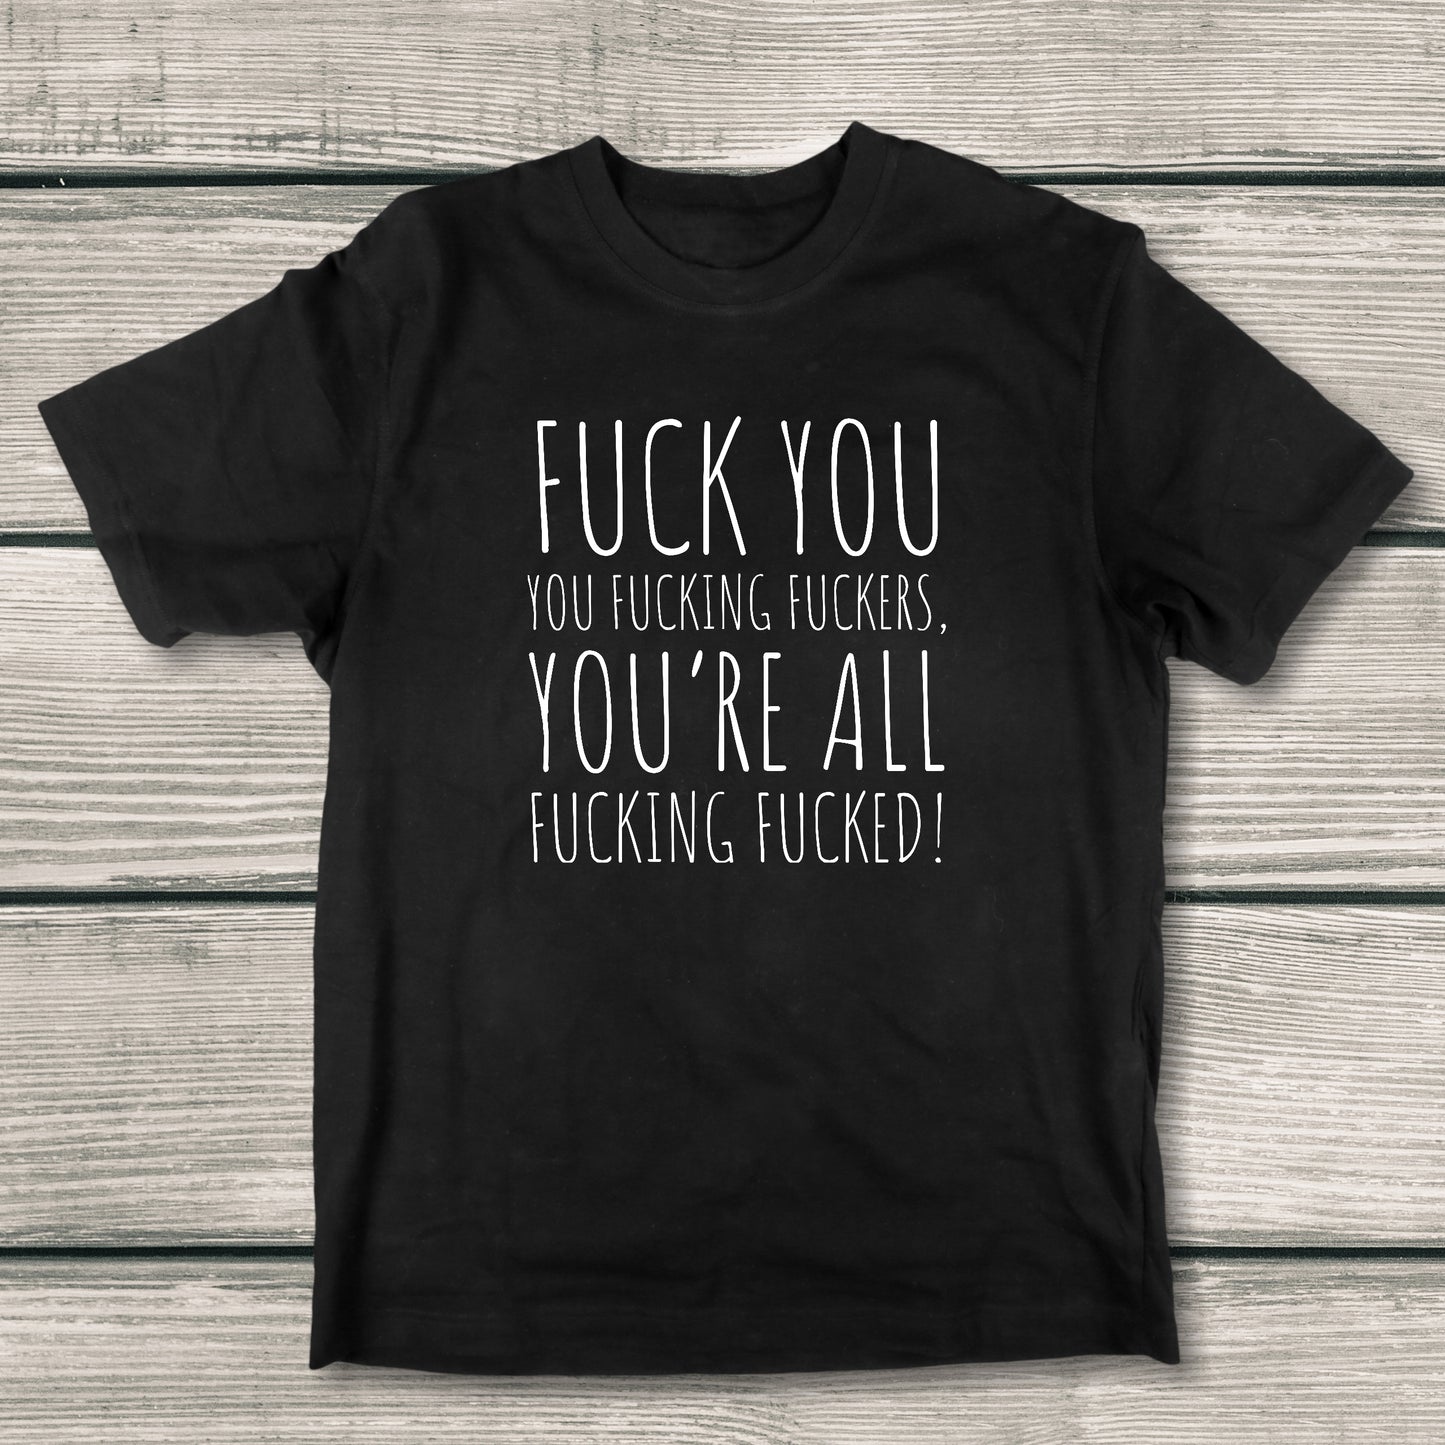 Sarcastic T-Shirt For Fuck You Fuckers TShirt For Funny Adult Content T Shirt Satire Shirt Ironic Tee Explicit TShirt Curse Words Tee